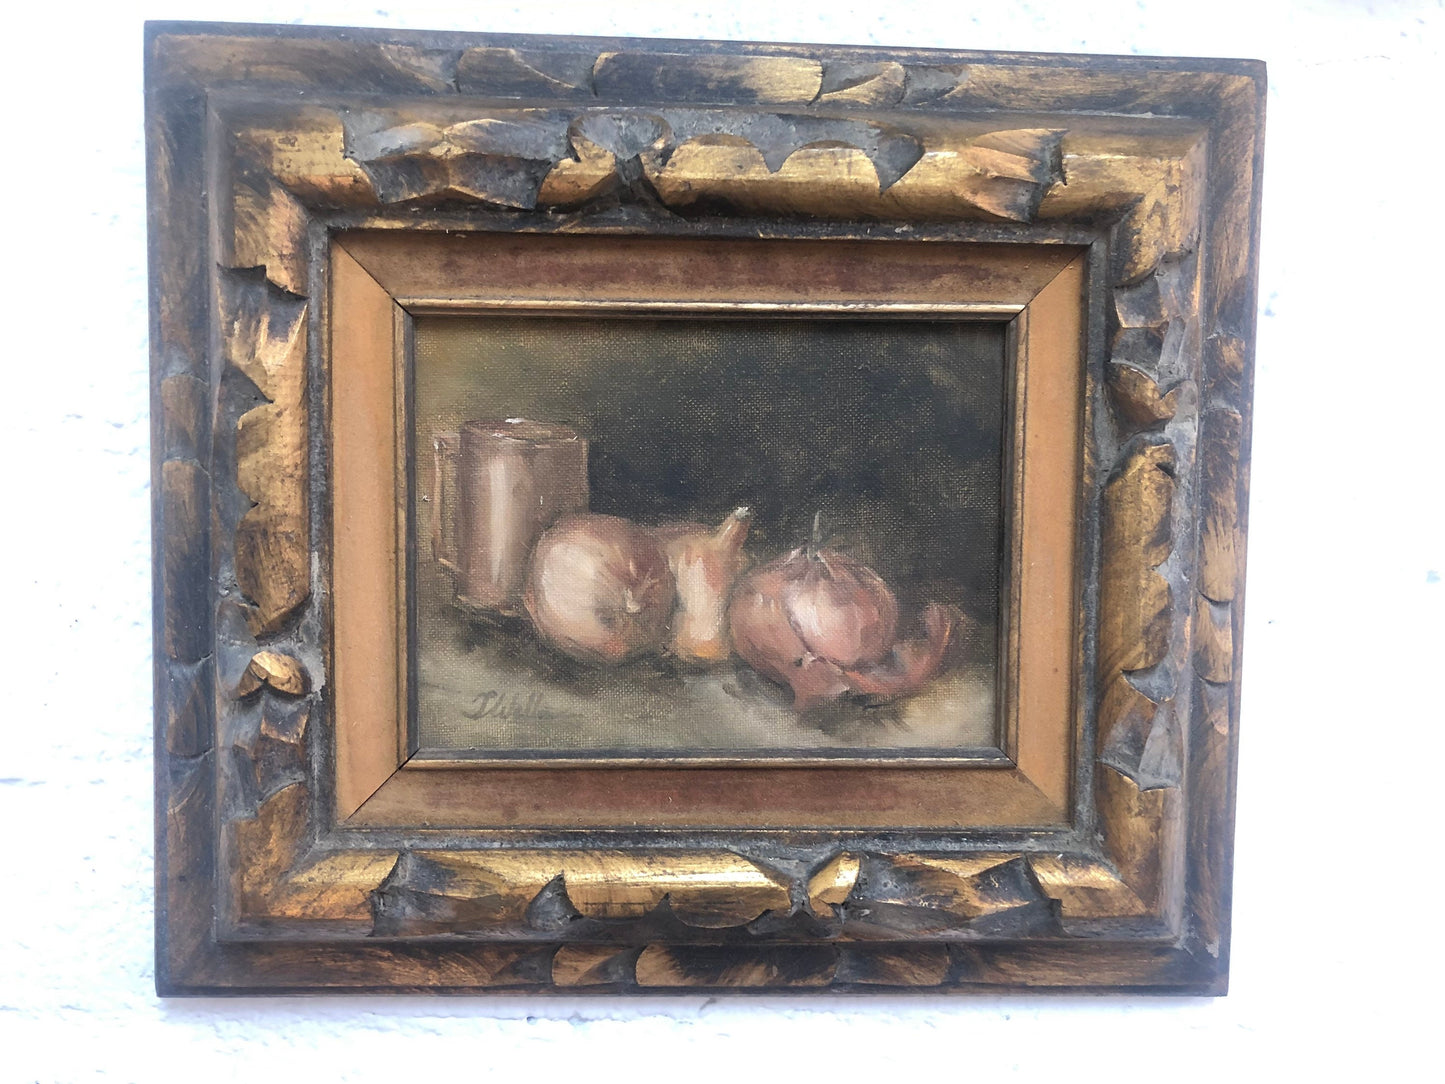 Classic Vintage Still Life Painting of Onions